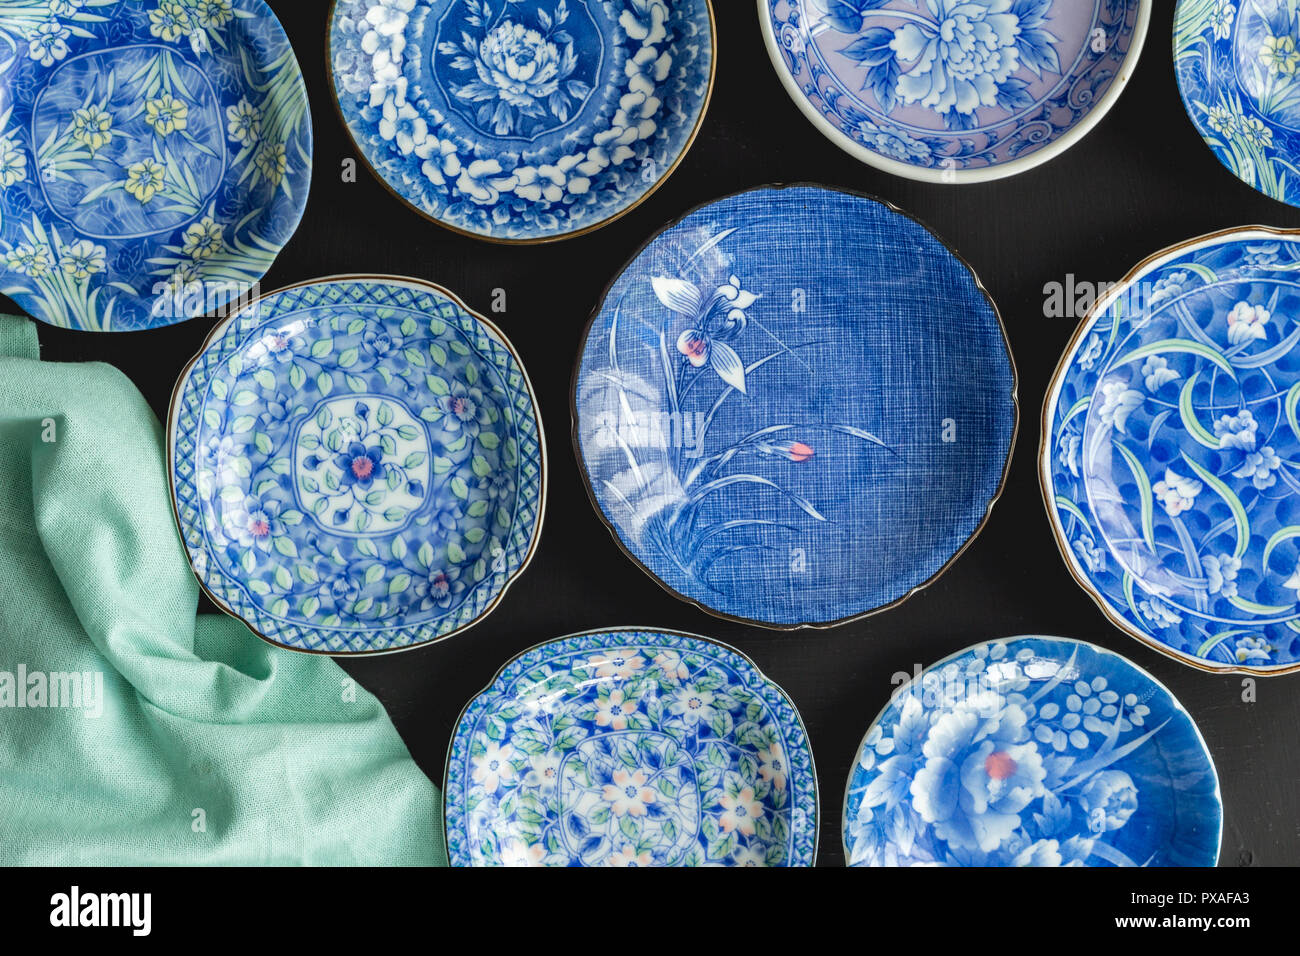 Blue and white decorative Japanese plates on black background - Top view photo of collection of ceramic plates Stock Photo